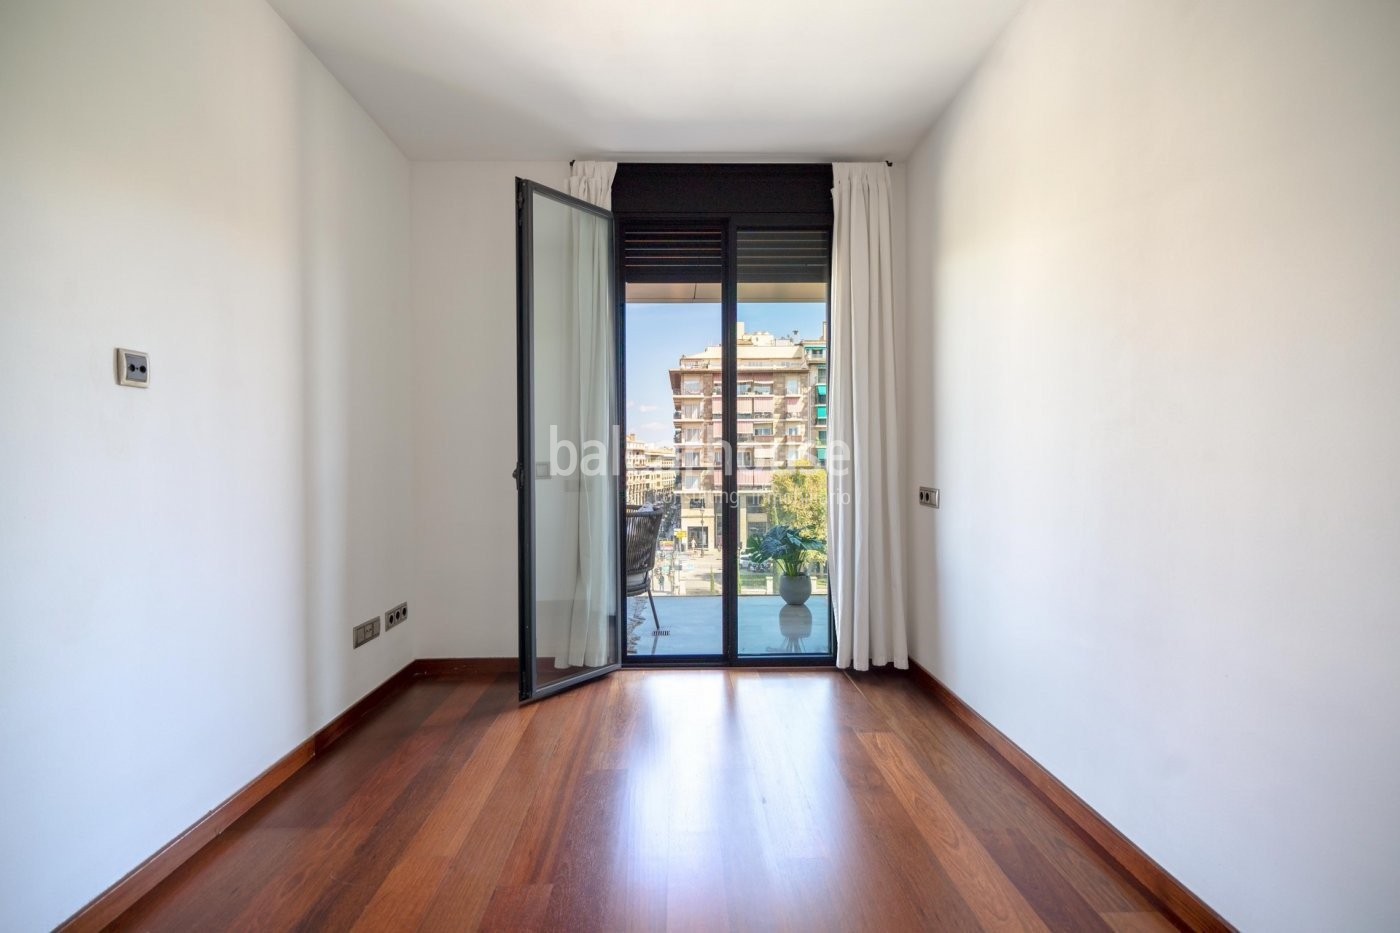 Light-filled elegance in this large flat with terrace overlooking the centre of Paseo Mallorca.